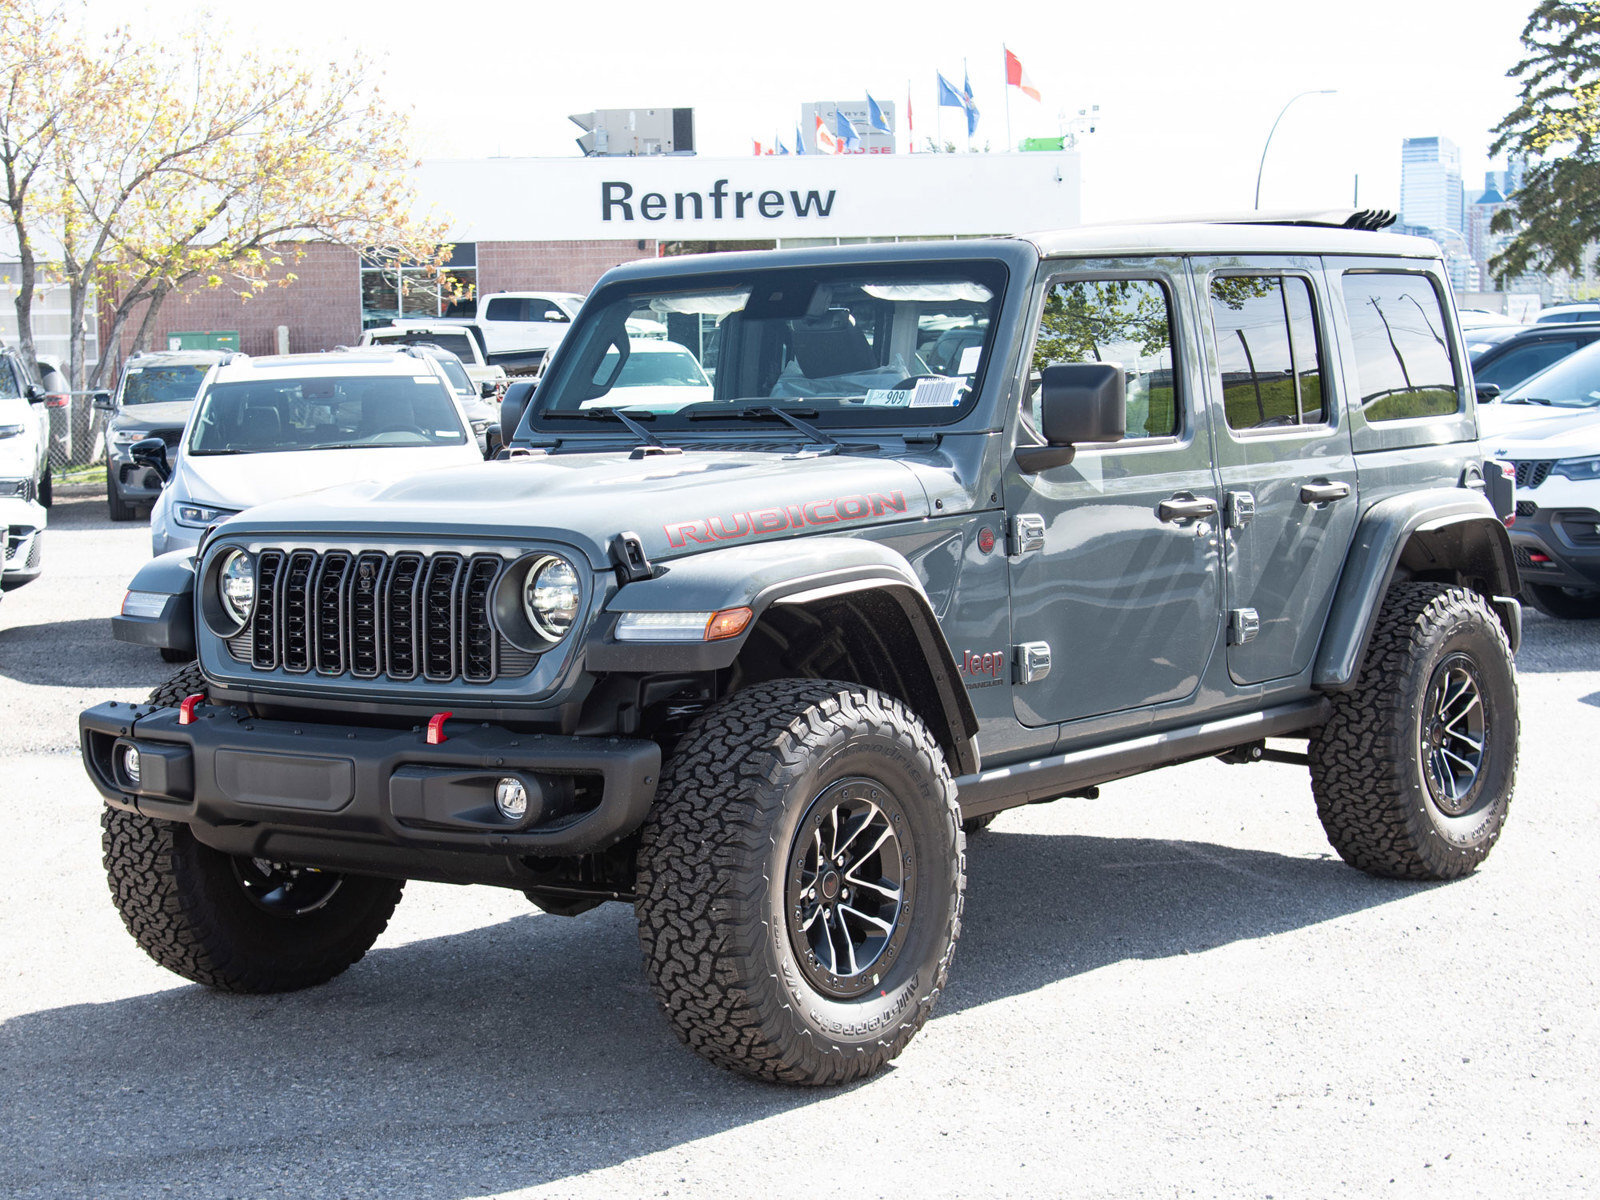 2024 Jeep Wrangler Rubicon X 4x4, 1-Touch Pwr Top, 35 Inch Tires, Nap